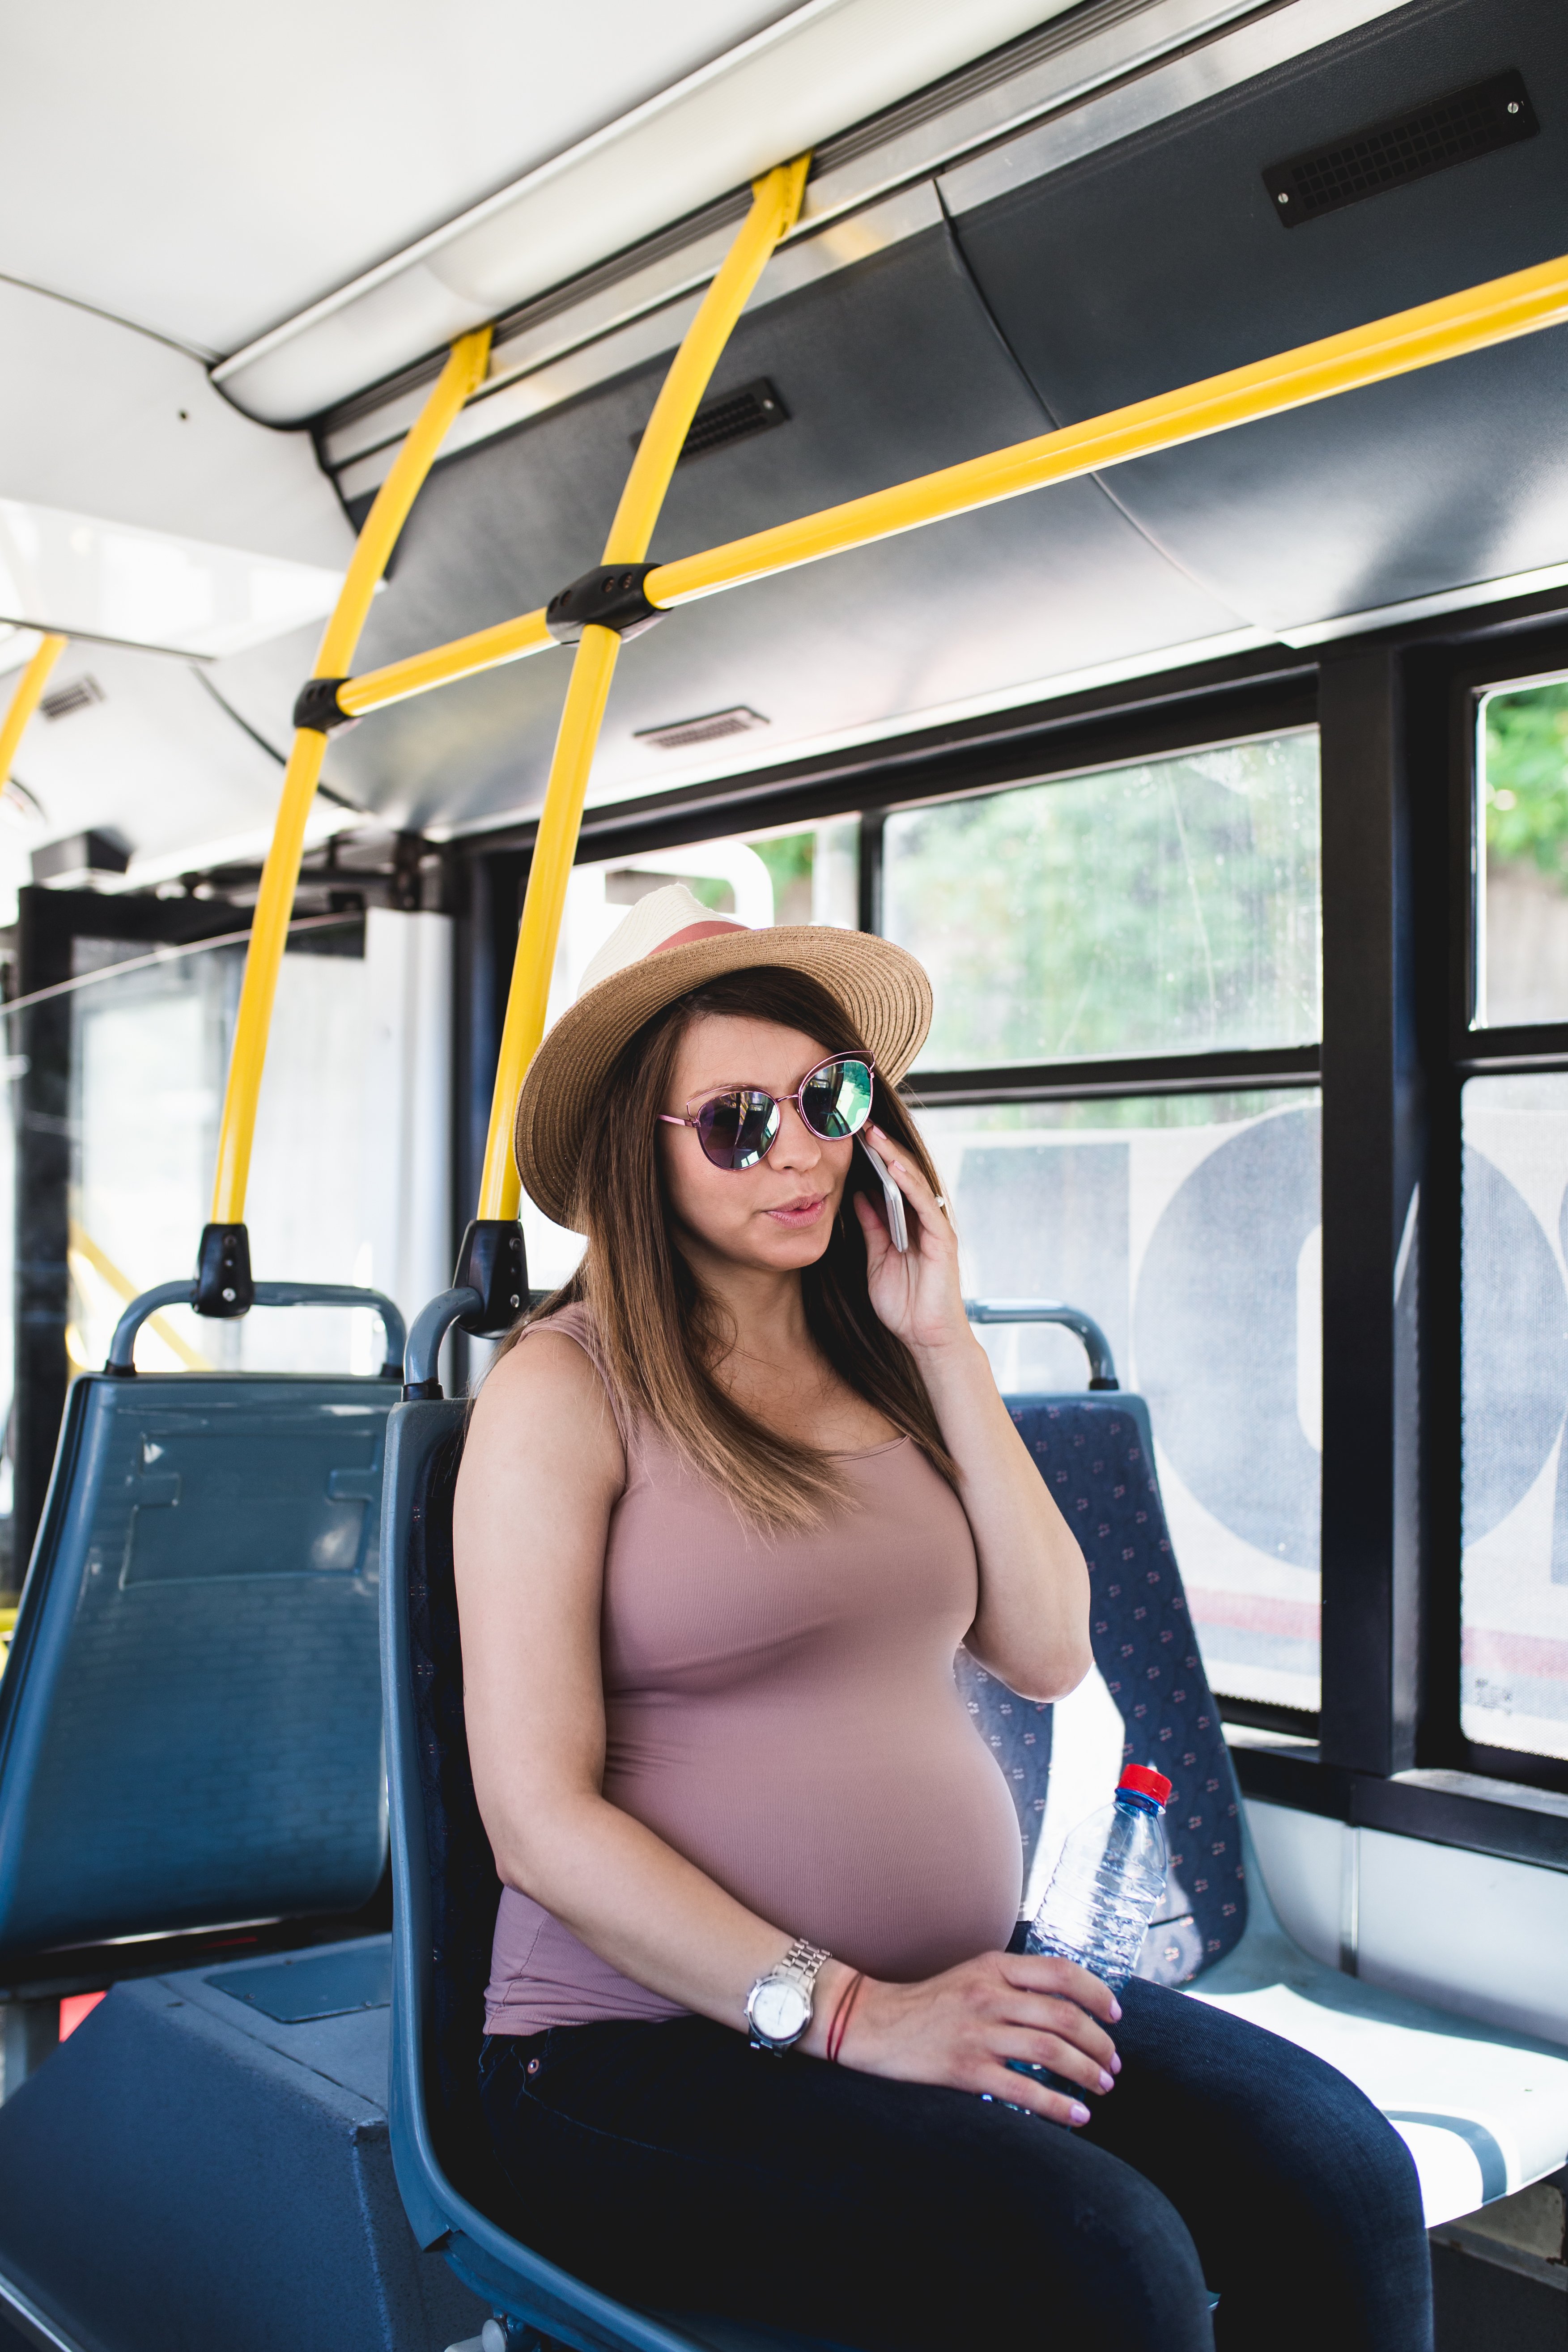 Pregnant woman on a bus | Source: Shutterstock